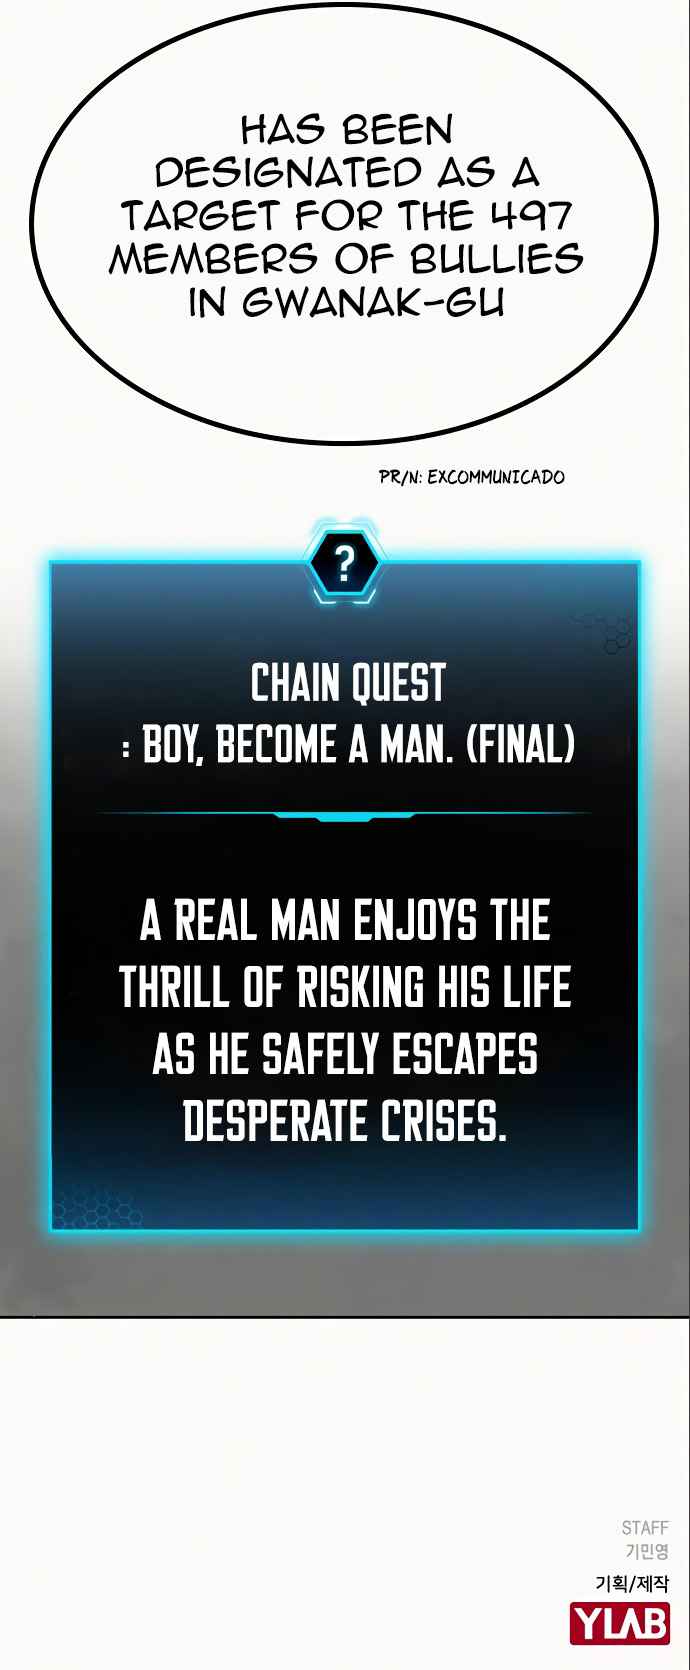 Reality Quest Chapter 6